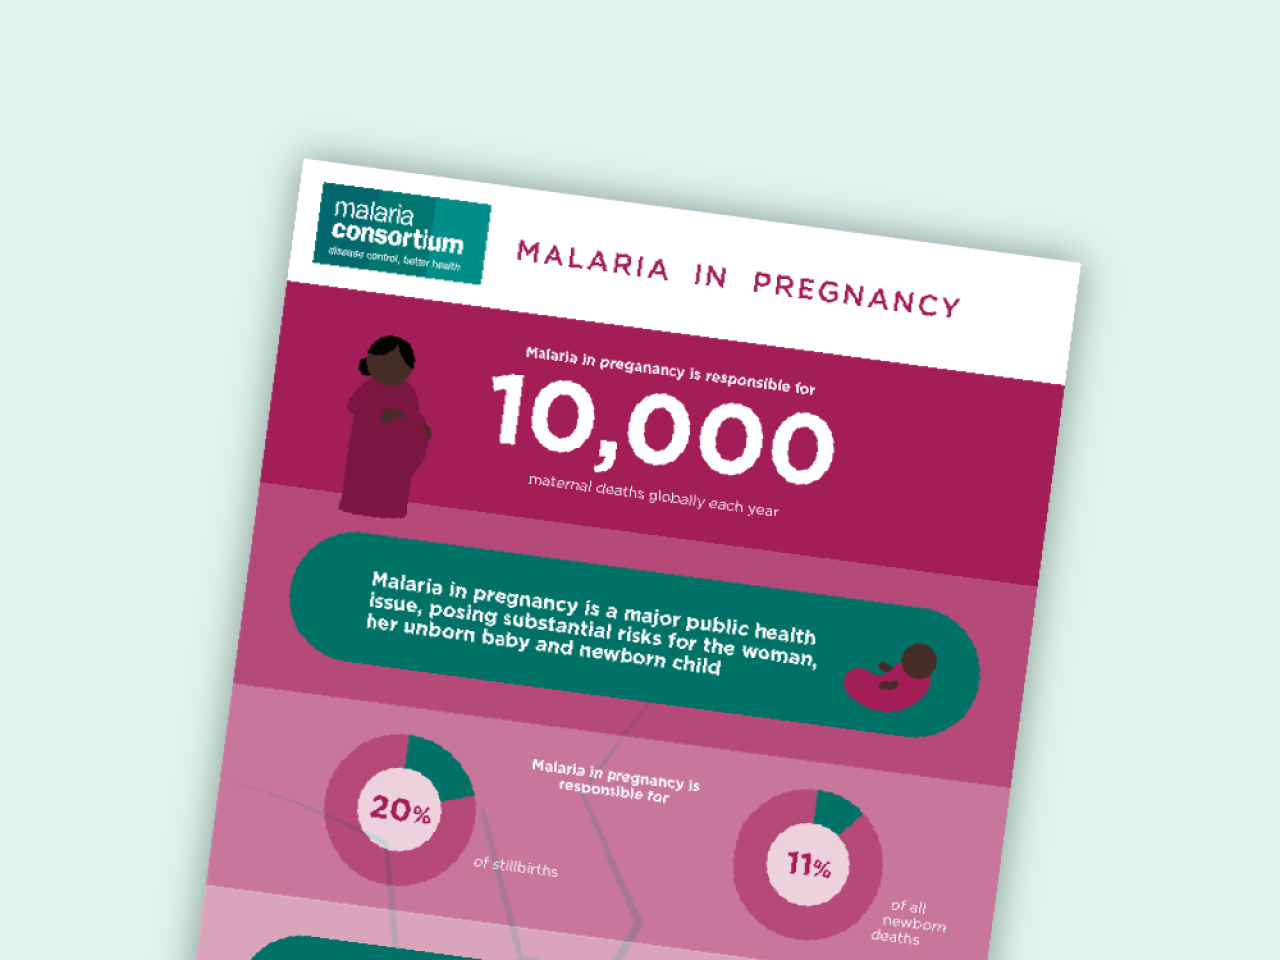 what is the literature review of malaria in pregnancy